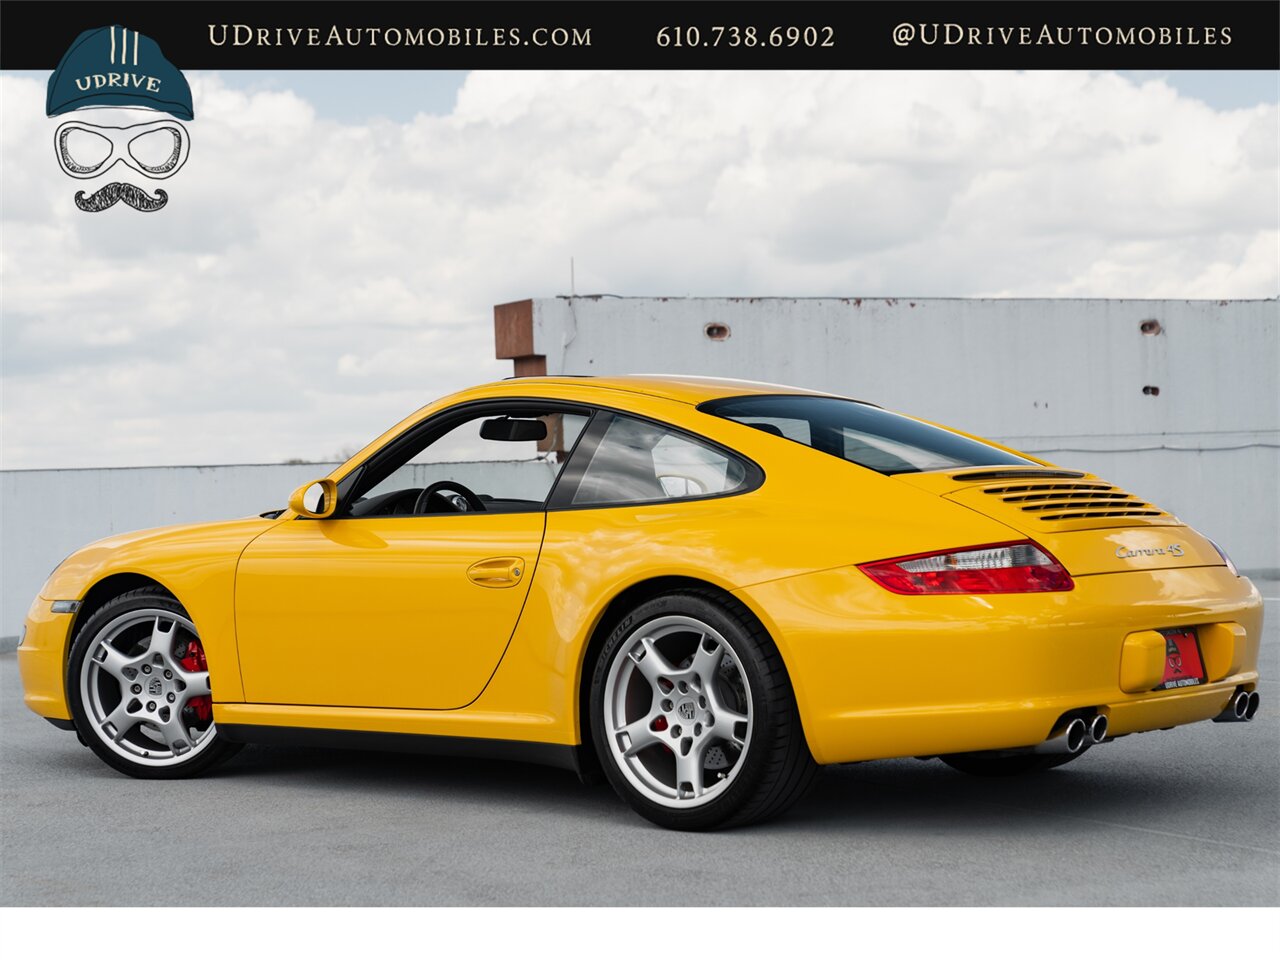 2006 Porsche 911 Carrera 4S  997 C4S 6 Speed Cocoa Full Lthr Chrono Sport Exhaust Special Color Combo - Photo 5 - West Chester, PA 19382